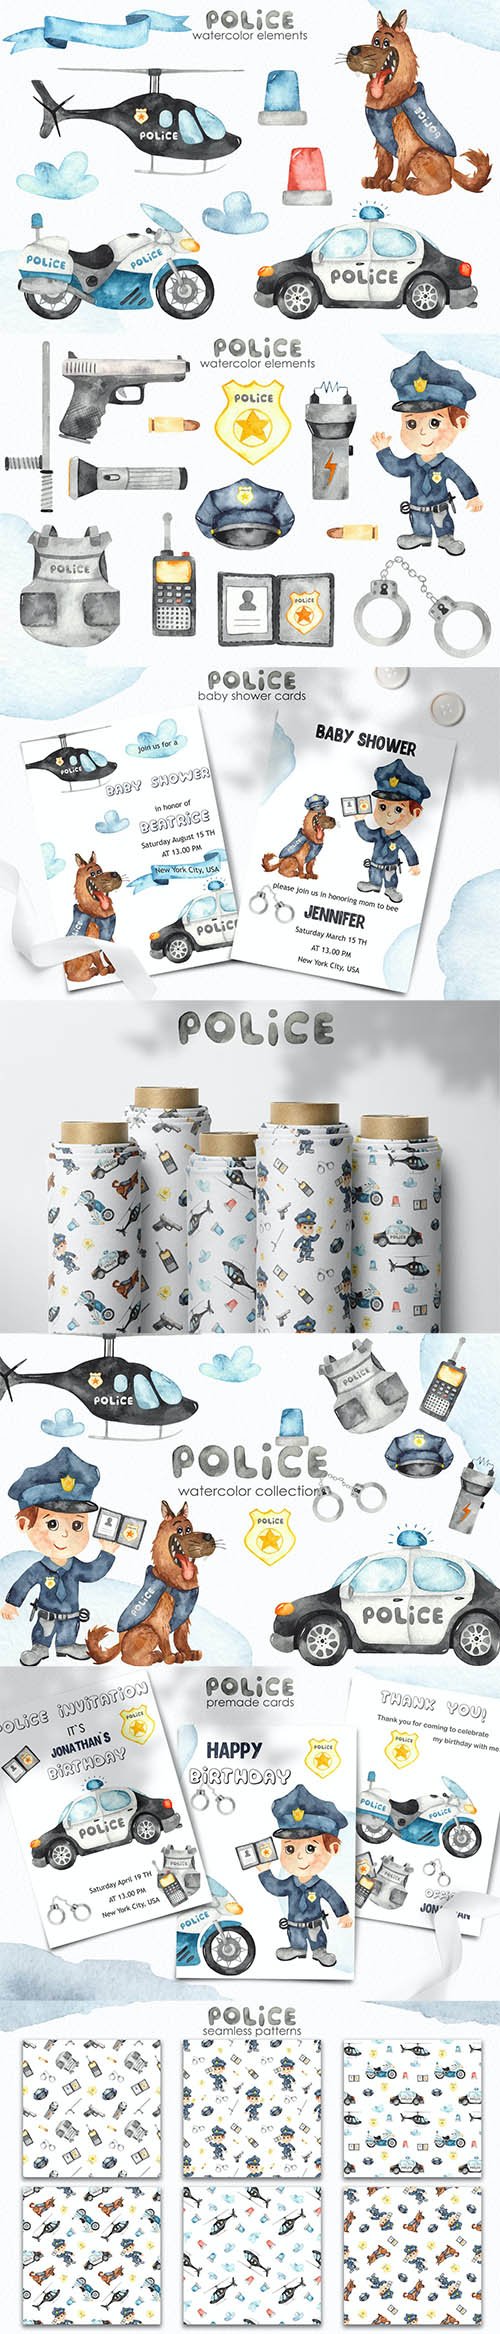 Watercolor Police. Clipart, cards, patterns